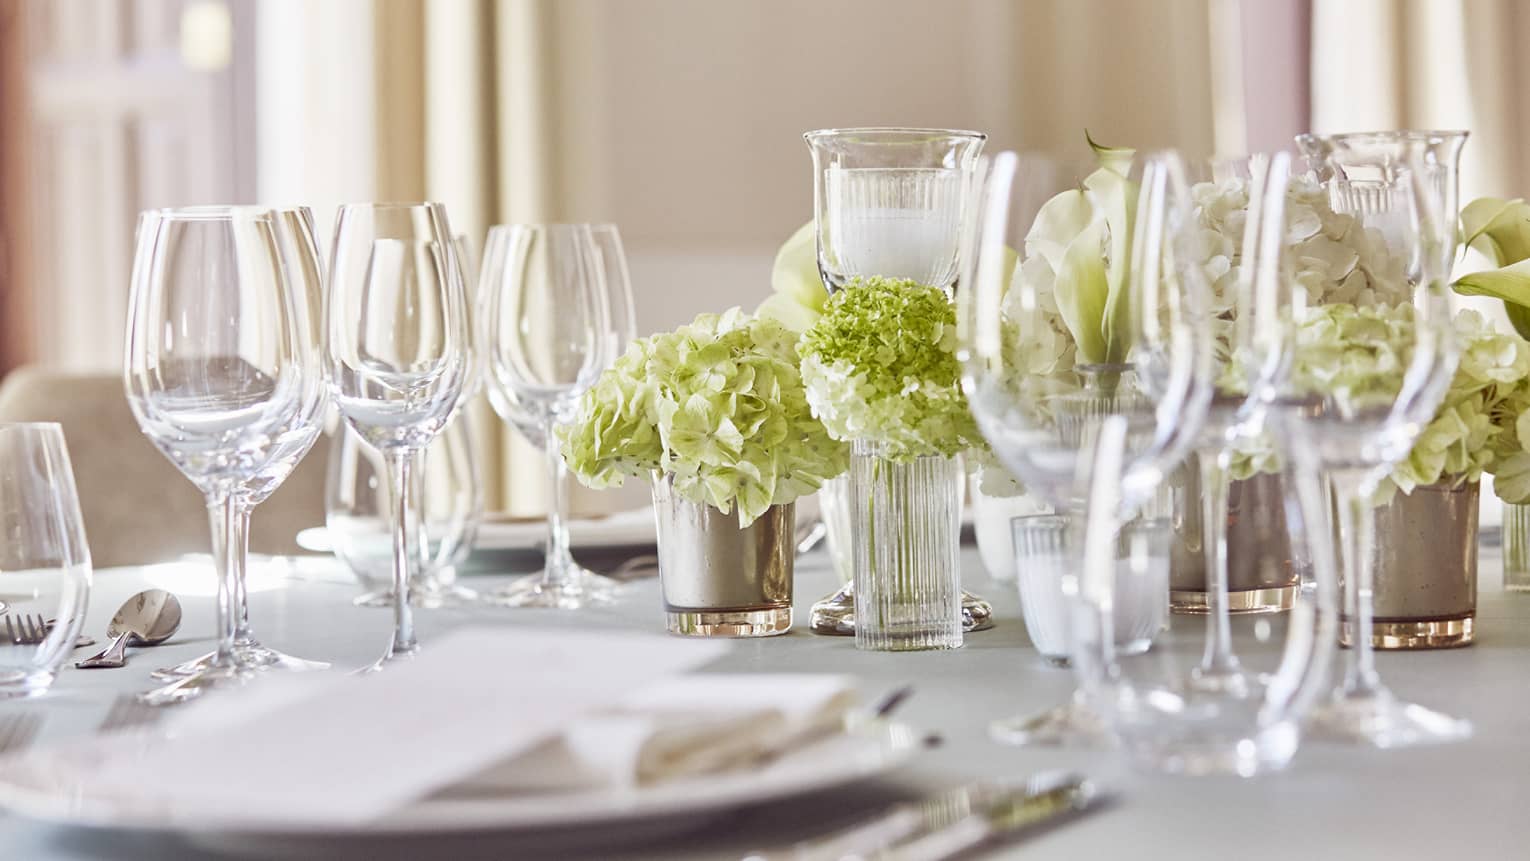 Place setting with plate, two wine glasses, one water glass, flower centerpiece